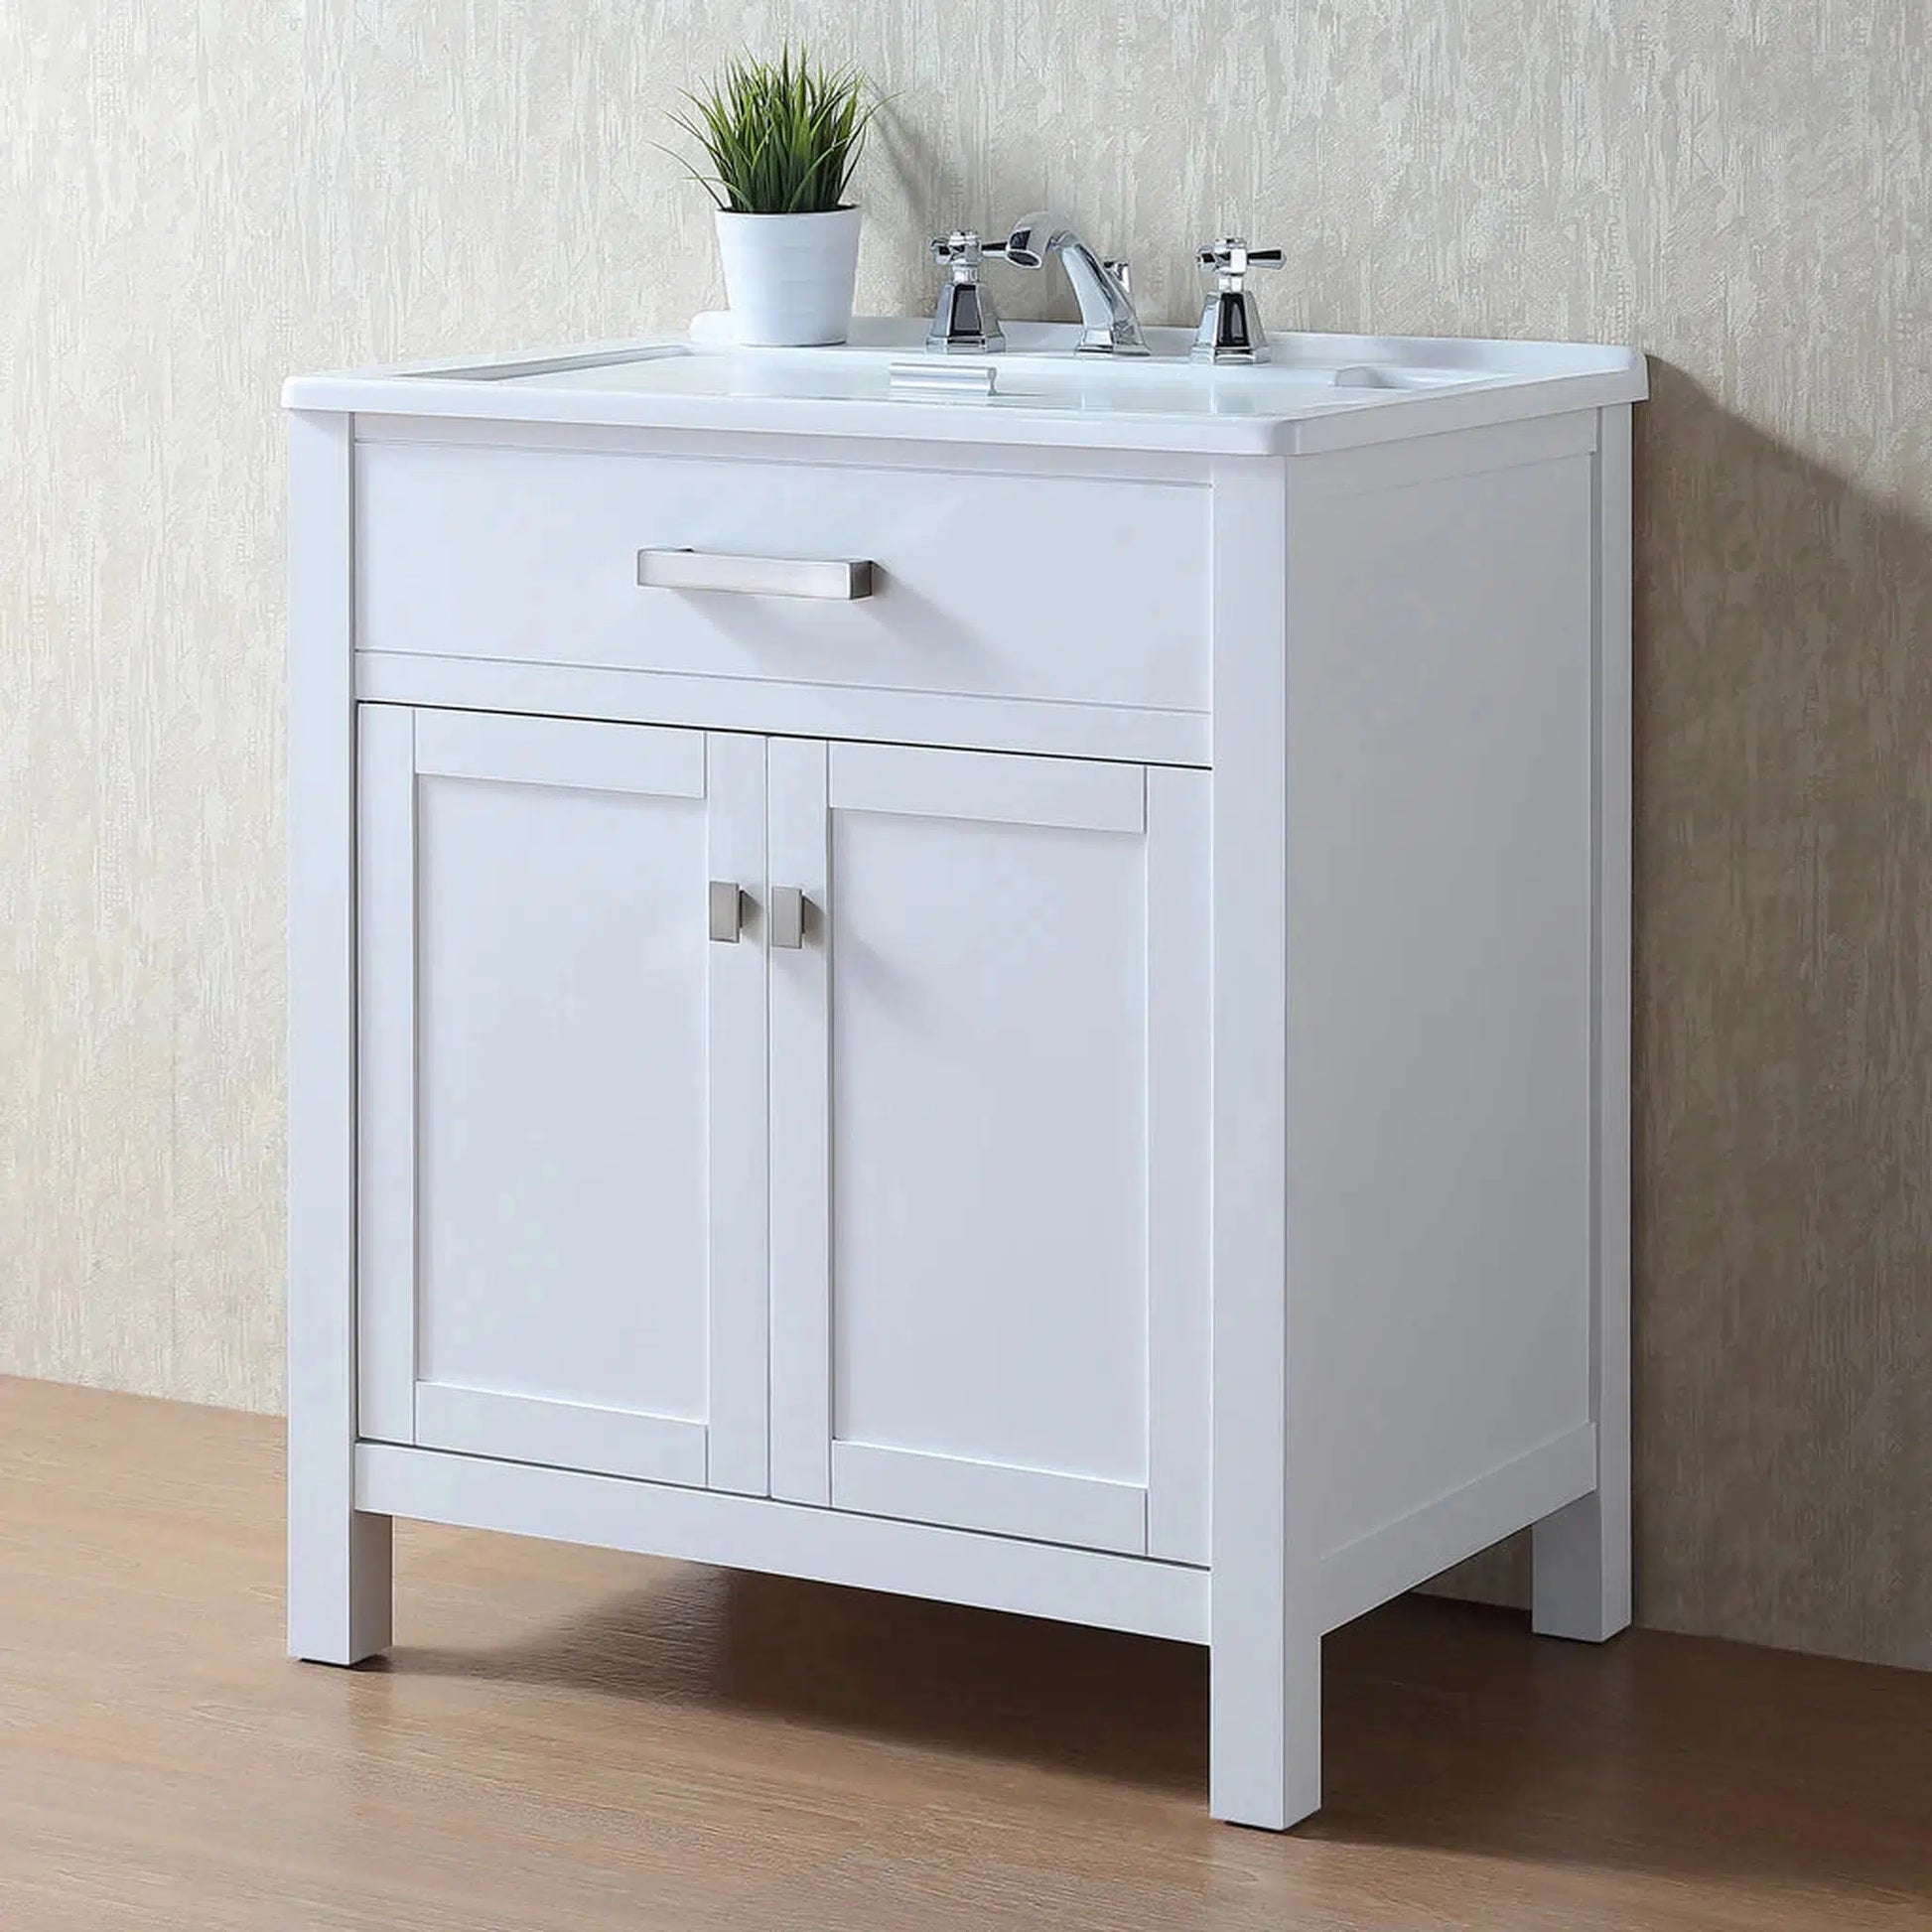 Stufurhome Luthor 30" White Freestanding Laundry Utility With Deep Acrylic Sink Basin, 2 Doors and Widespread Faucet Holes